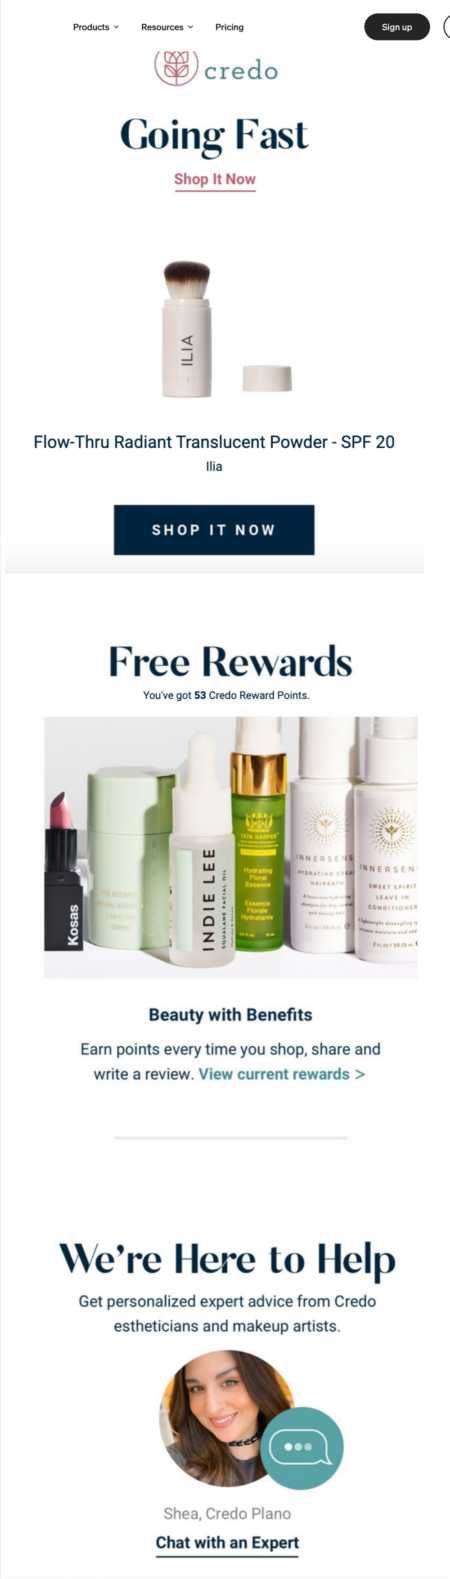 Email features viewed item and highlights the brand's and rewards program.